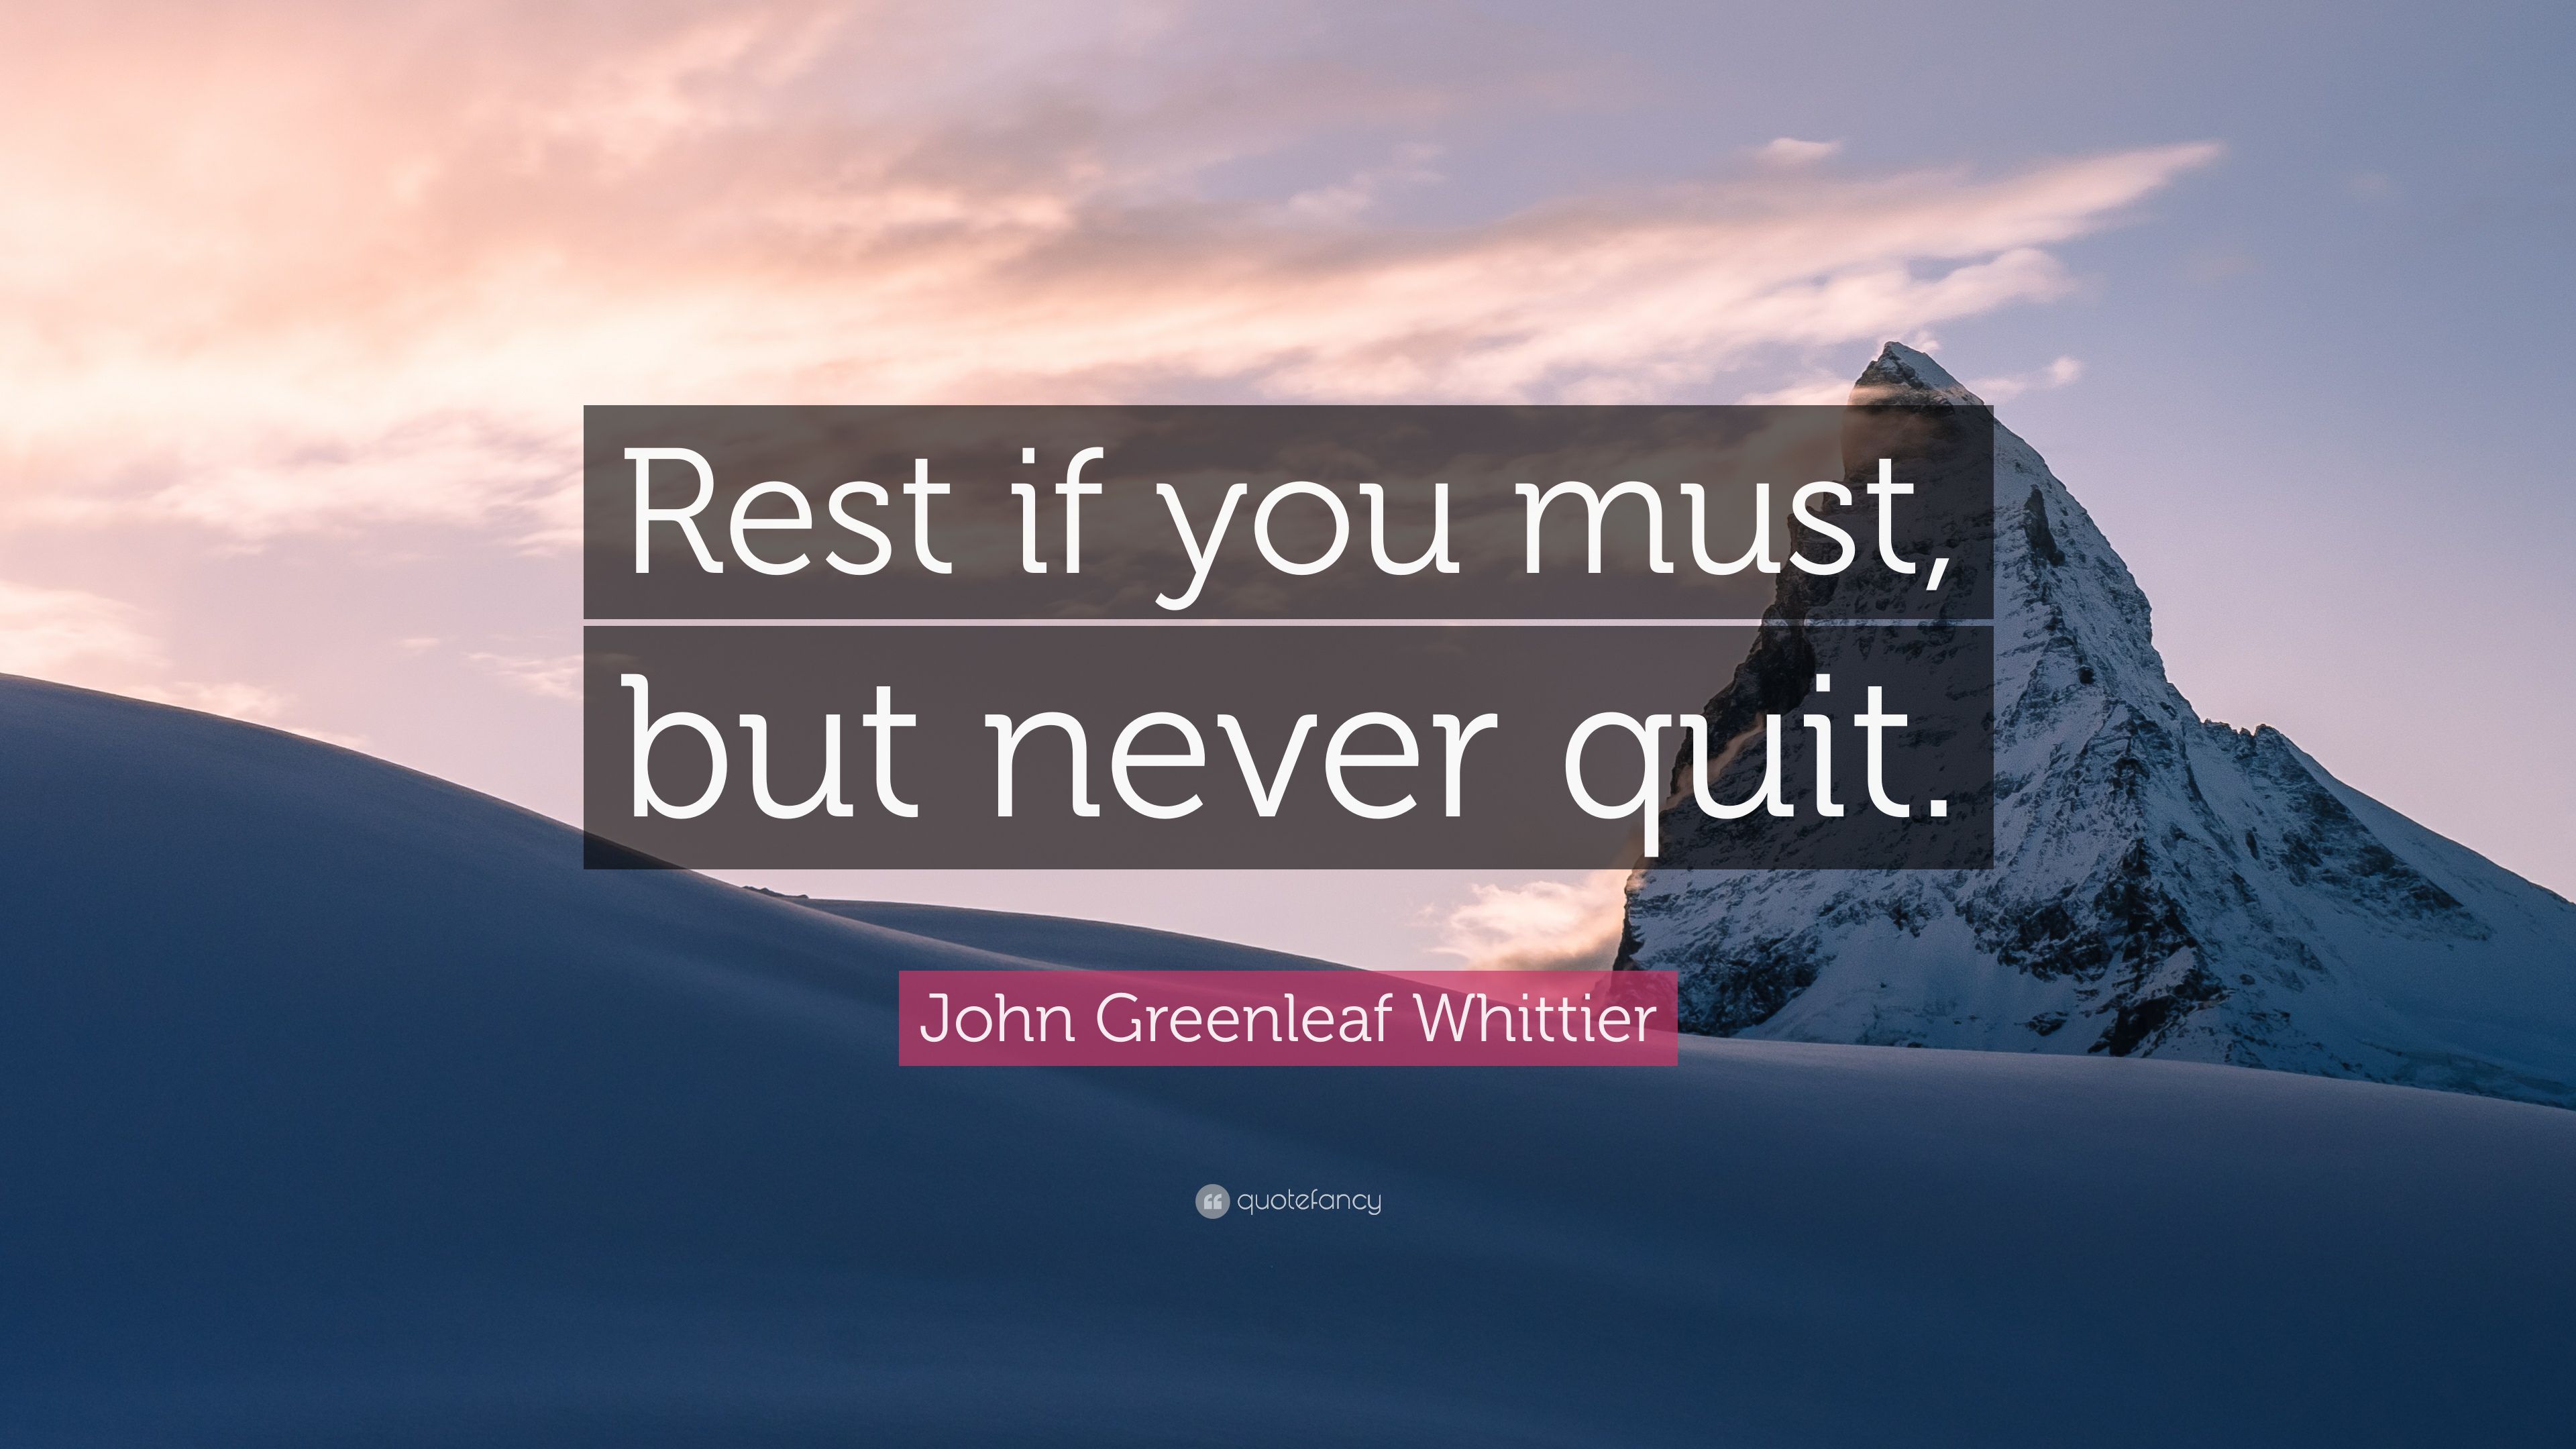 John Greenleaf Whittier Quote: “Rest if you must, but never quit.” (7 wallpaper)